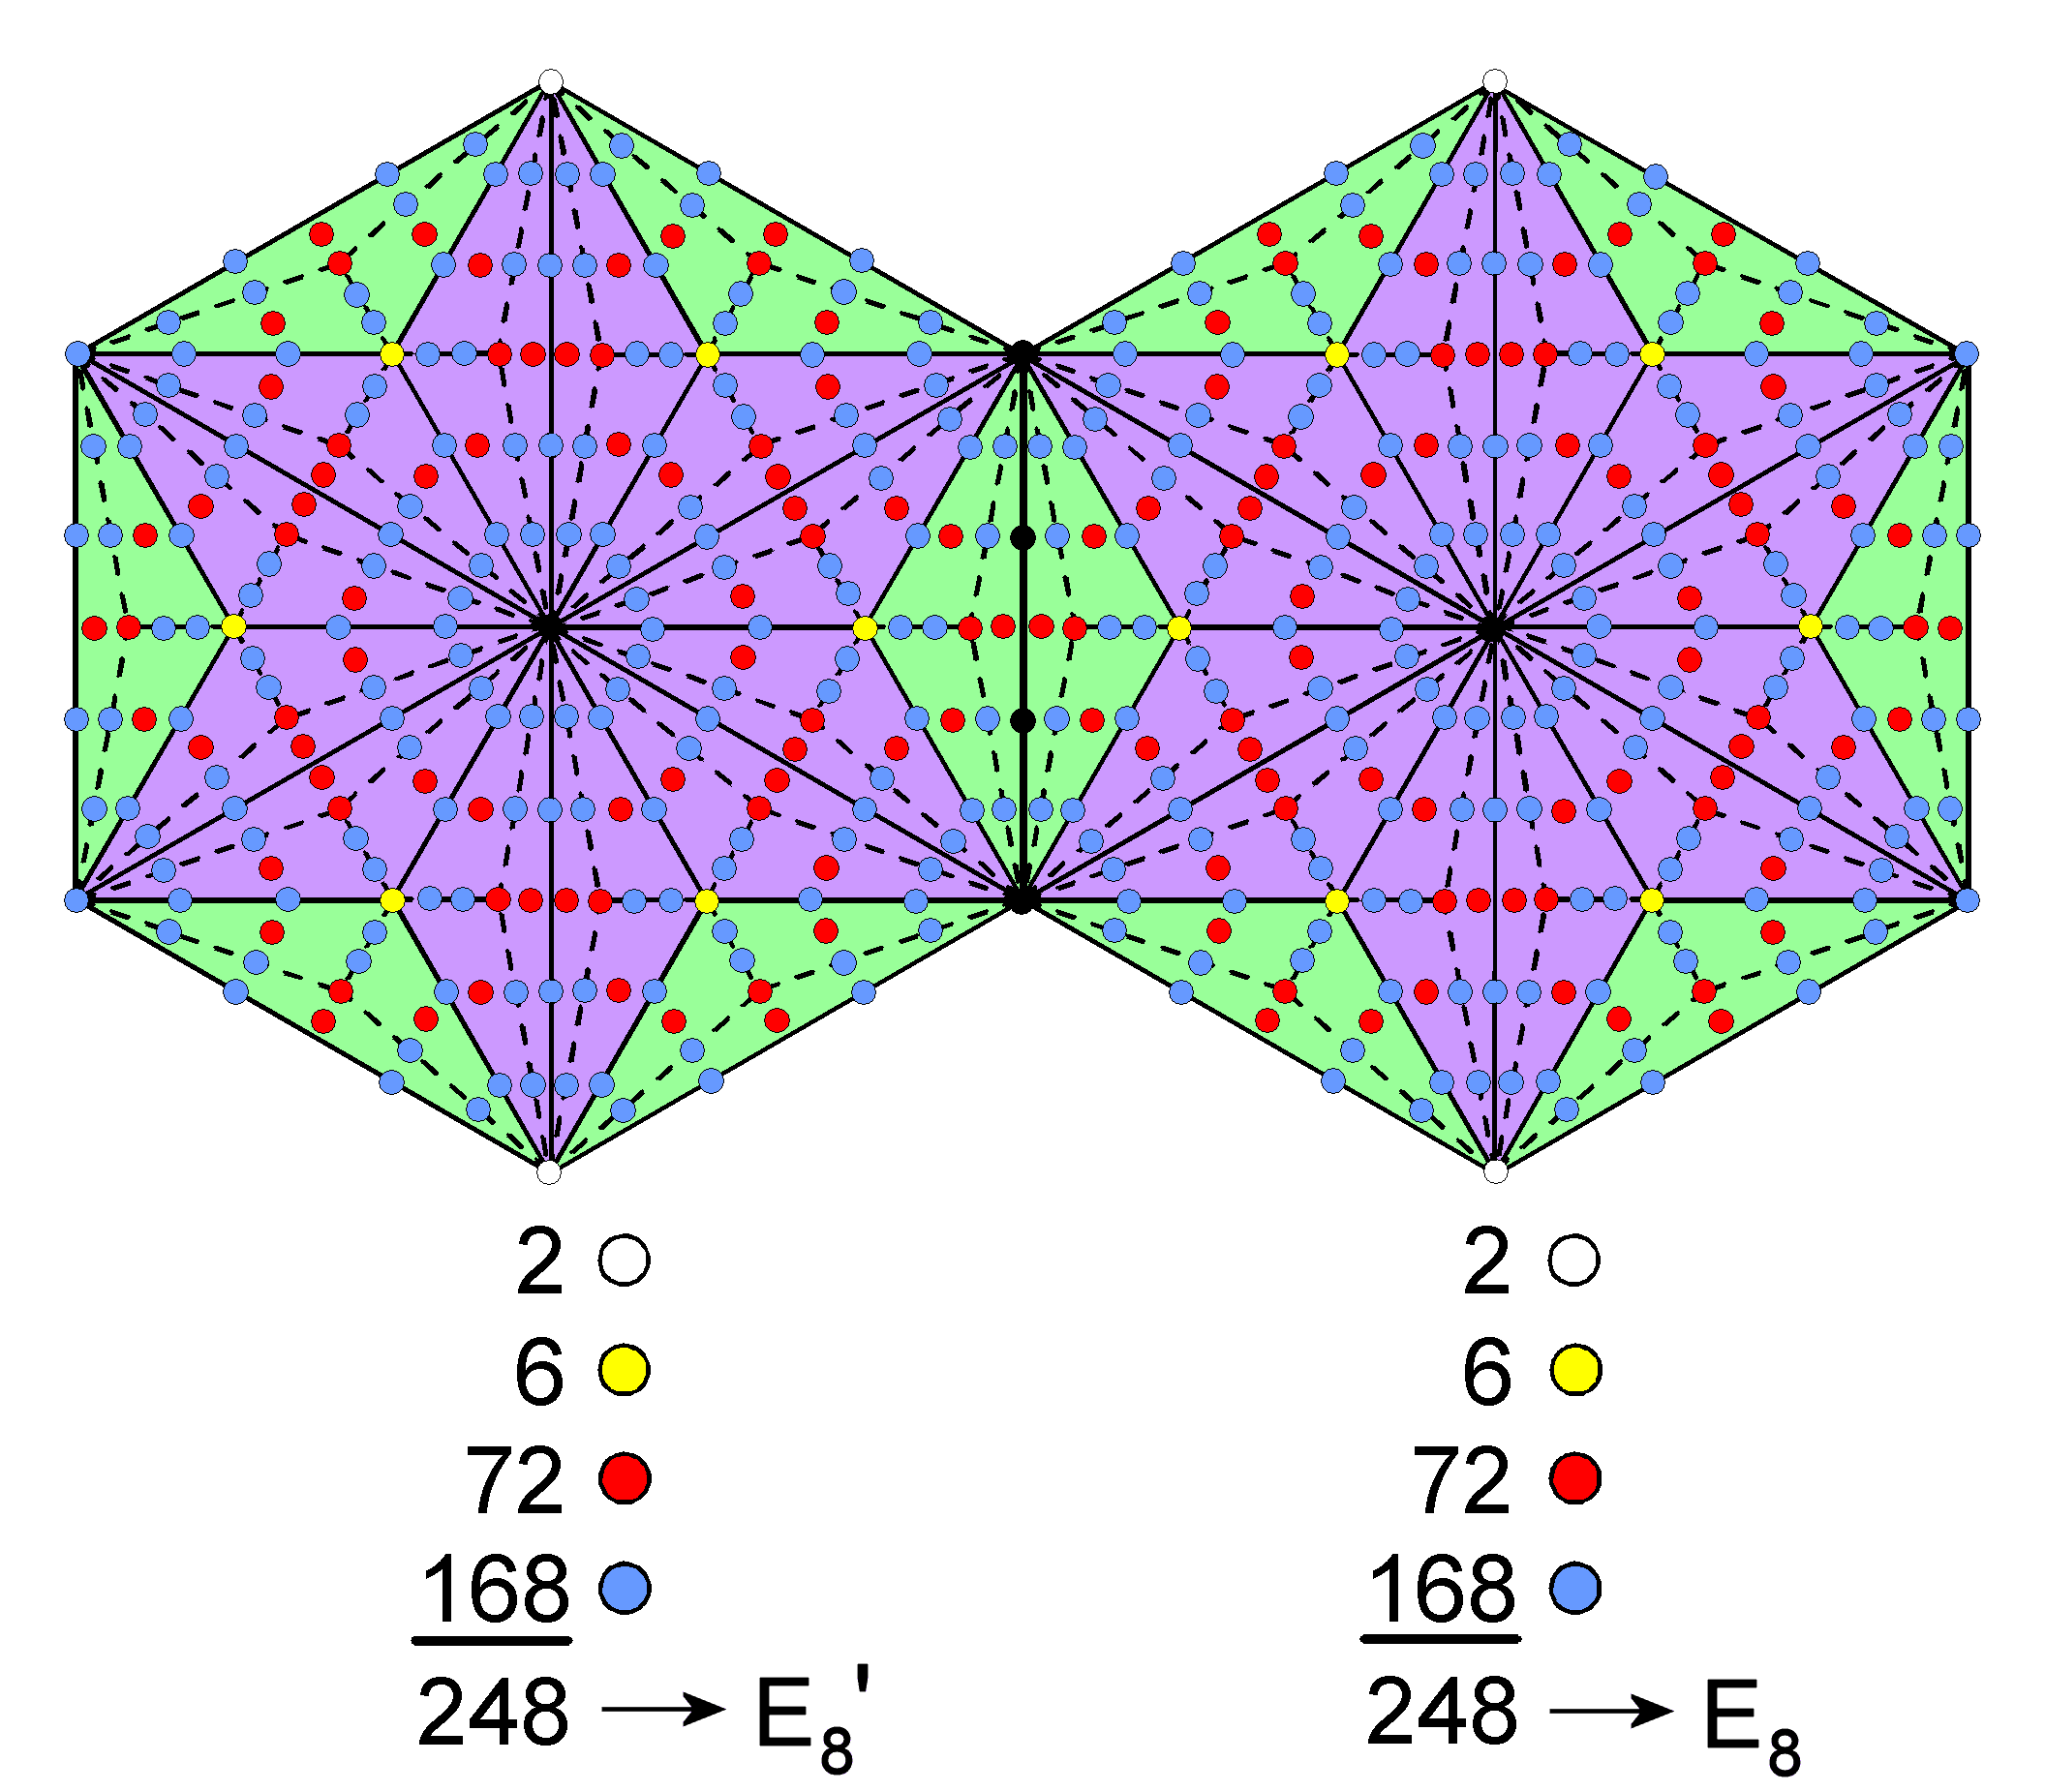 496 yods surround centres of two joined Type C hexagons